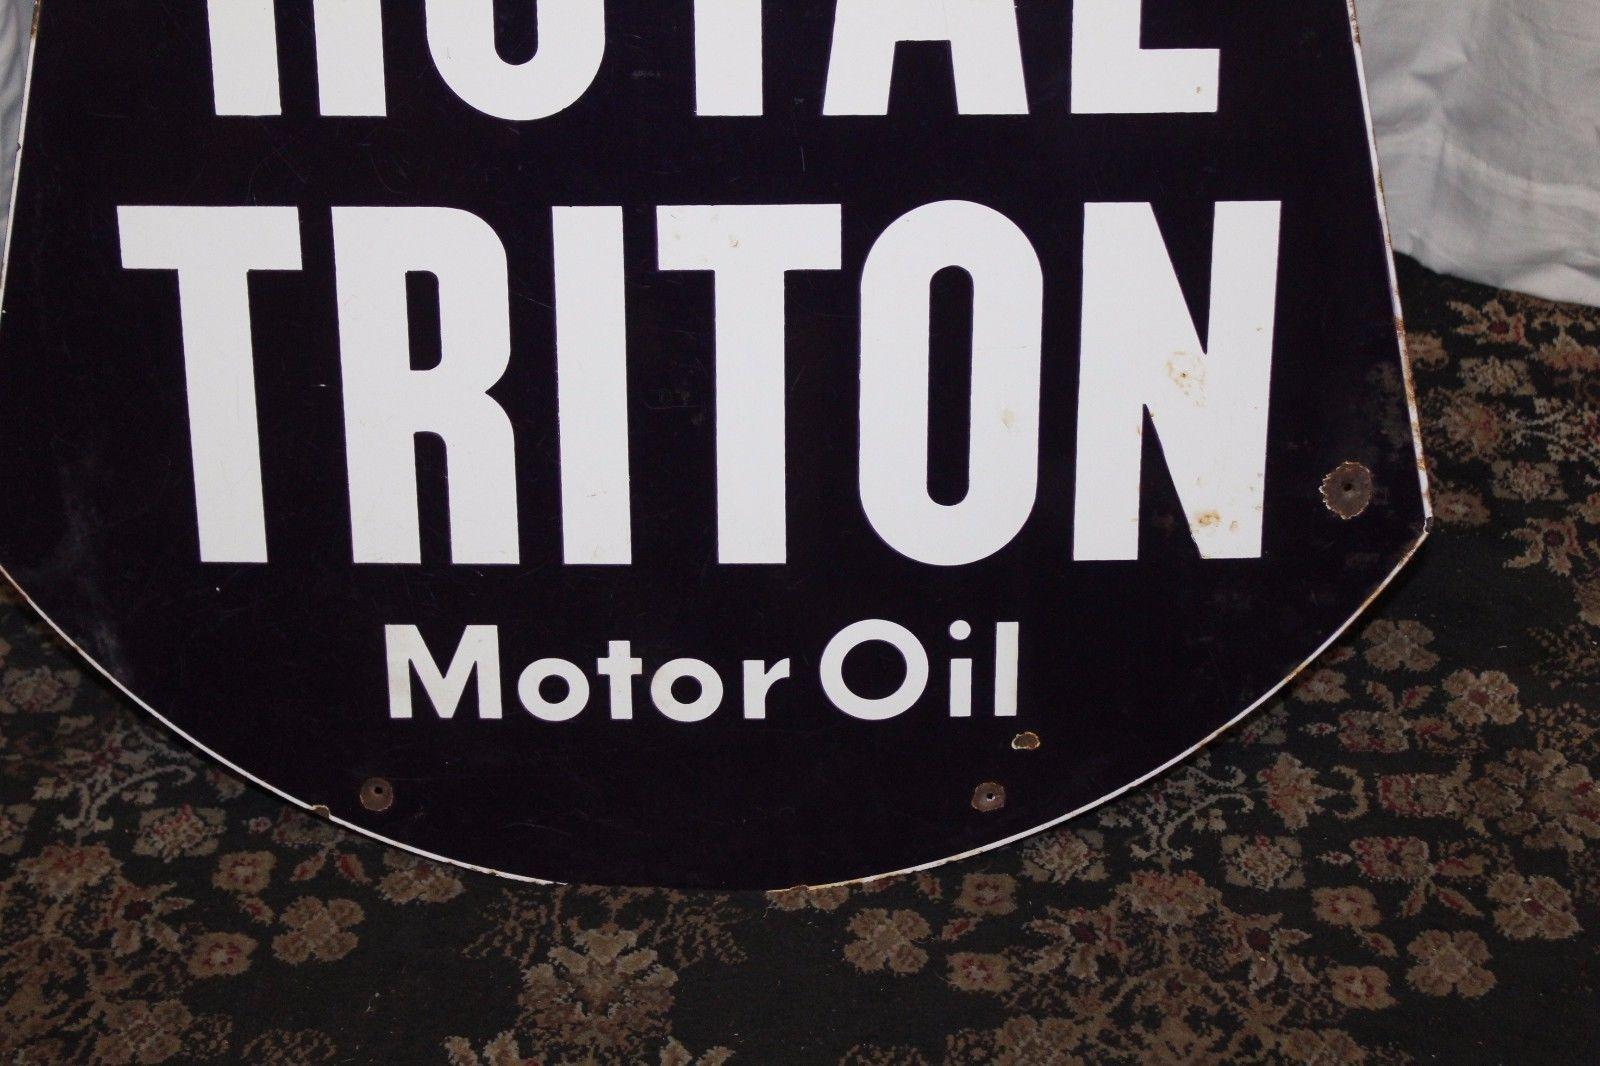 This double sided sign is made to hand in a dealership or body shop to advertise Royal Triton Motor oil.